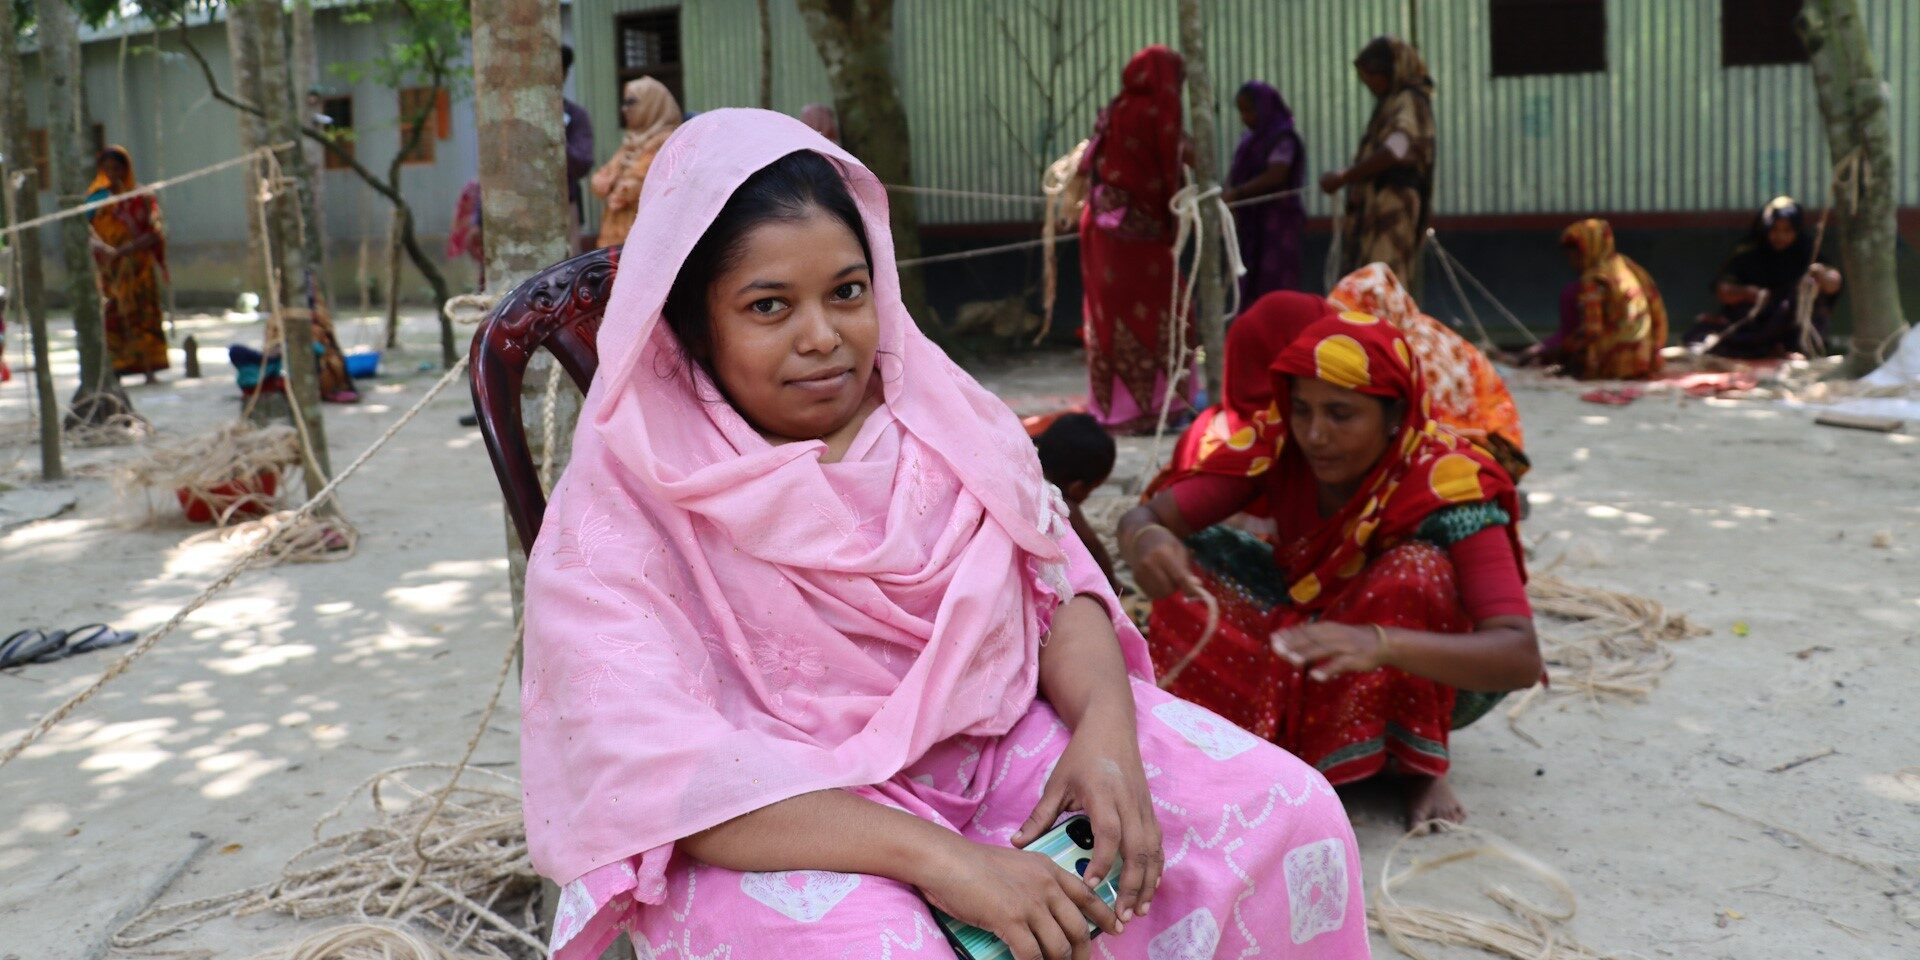 Subarna Khatun sits cross-legged on the ground outside, in front of a group of other female artisans